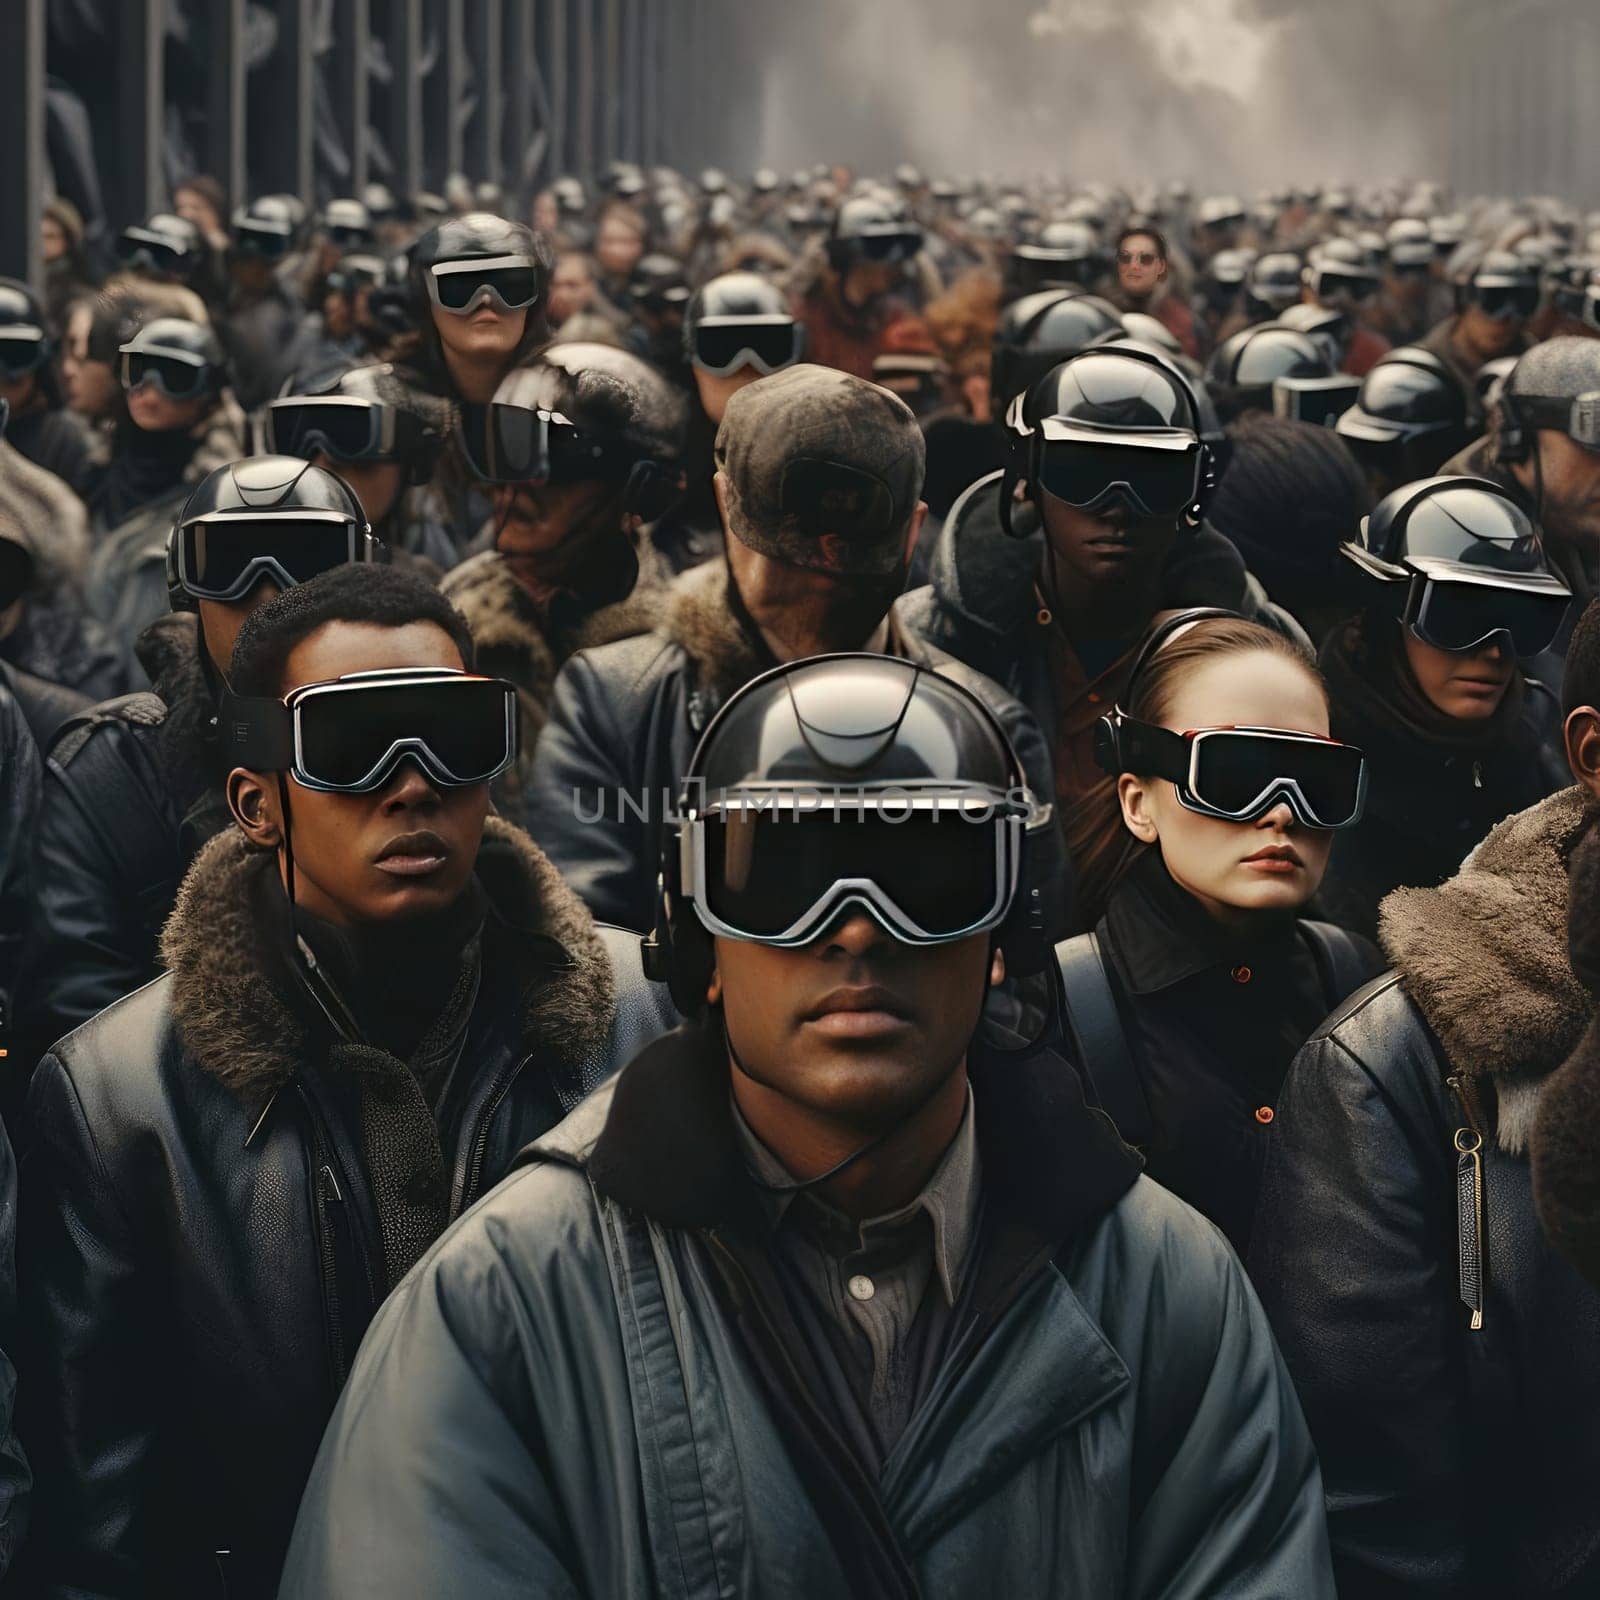 A crowd of people wearing virtual glasses by cherezoff